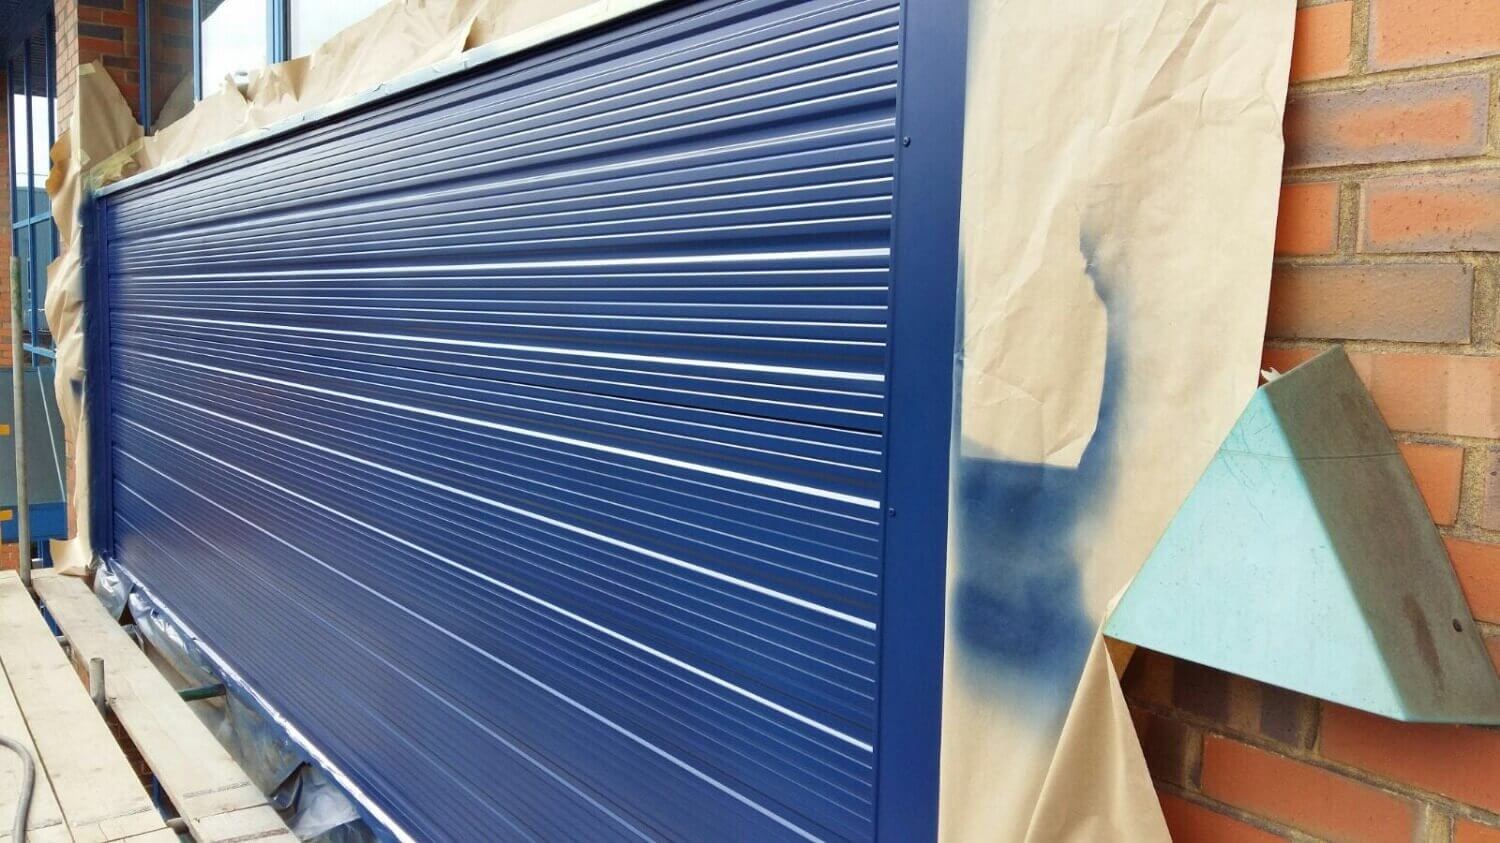 Cladding Repairs and Re-Spraying Luton, Bedfordshire